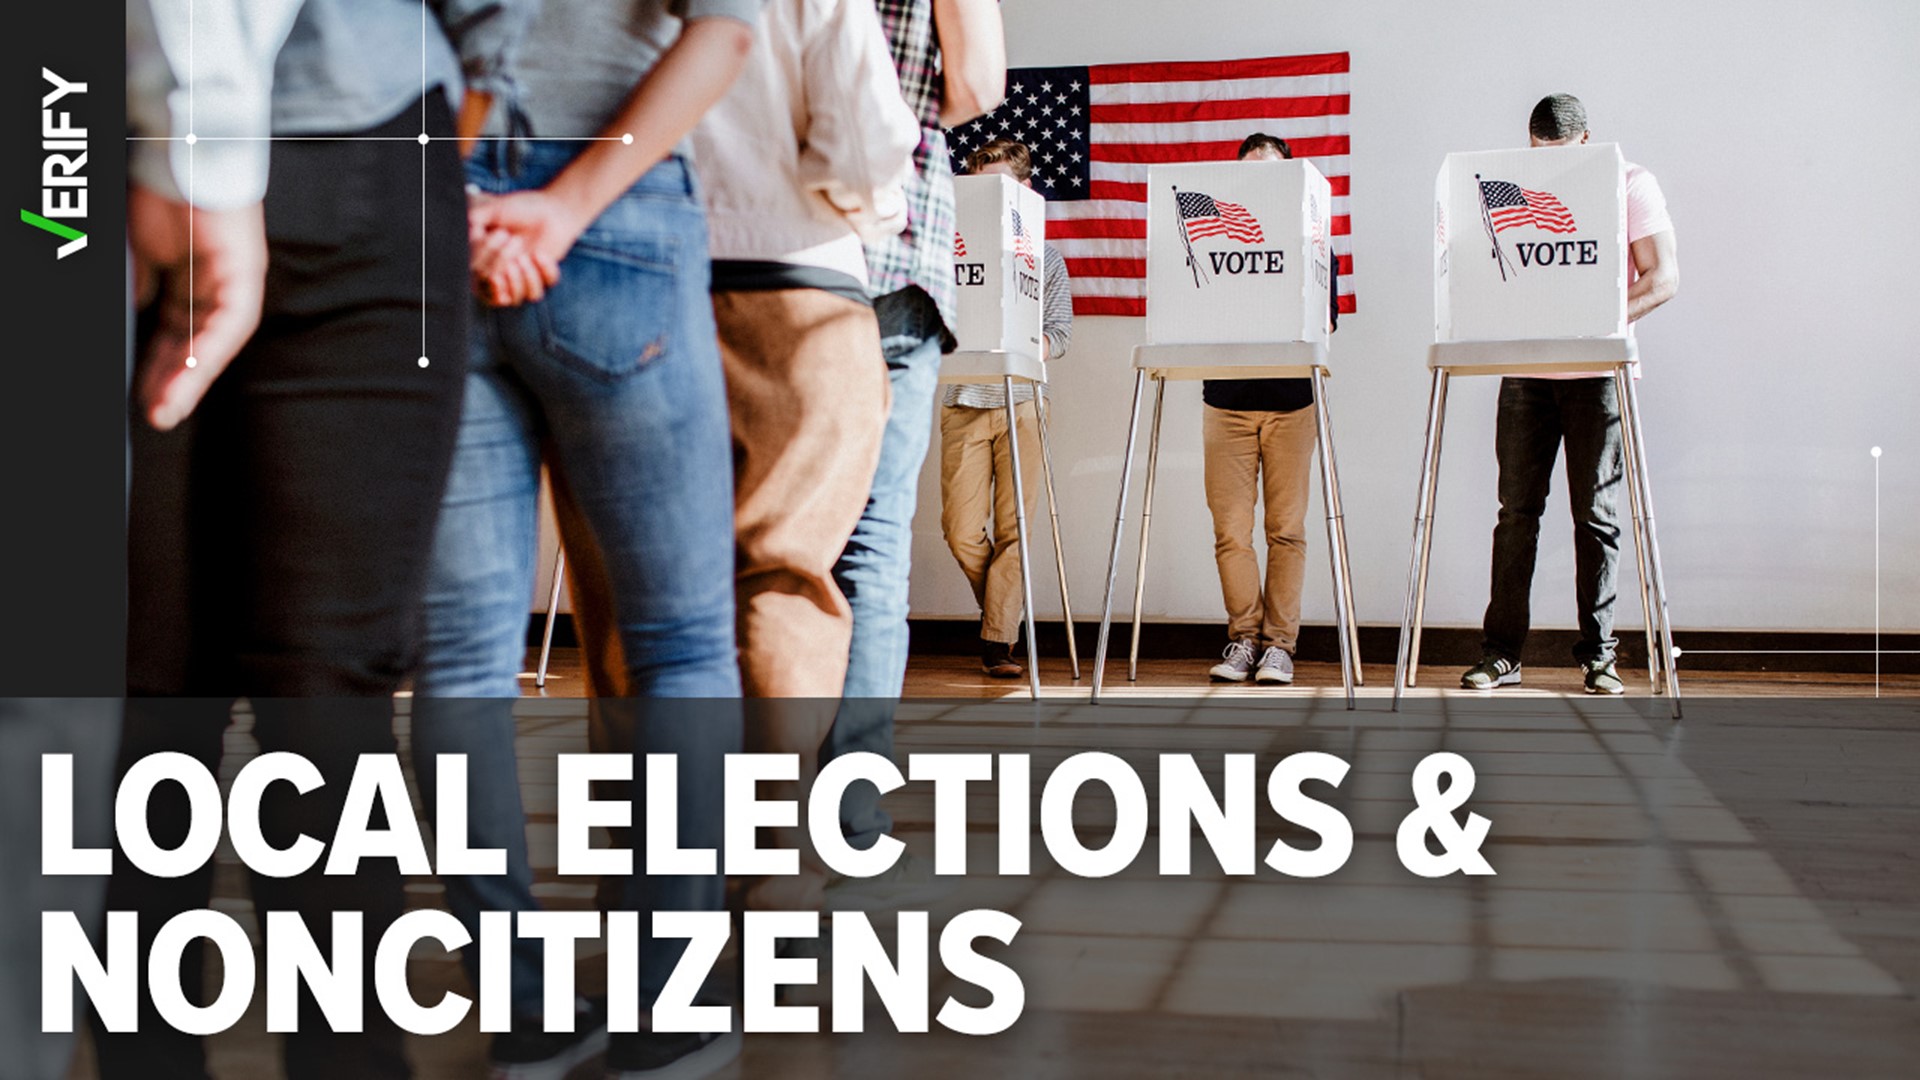 Undocumented immigrants and other noncitizens can’t vote for federal or state offices, but they can vote for local offices in more than a dozen municipalities.